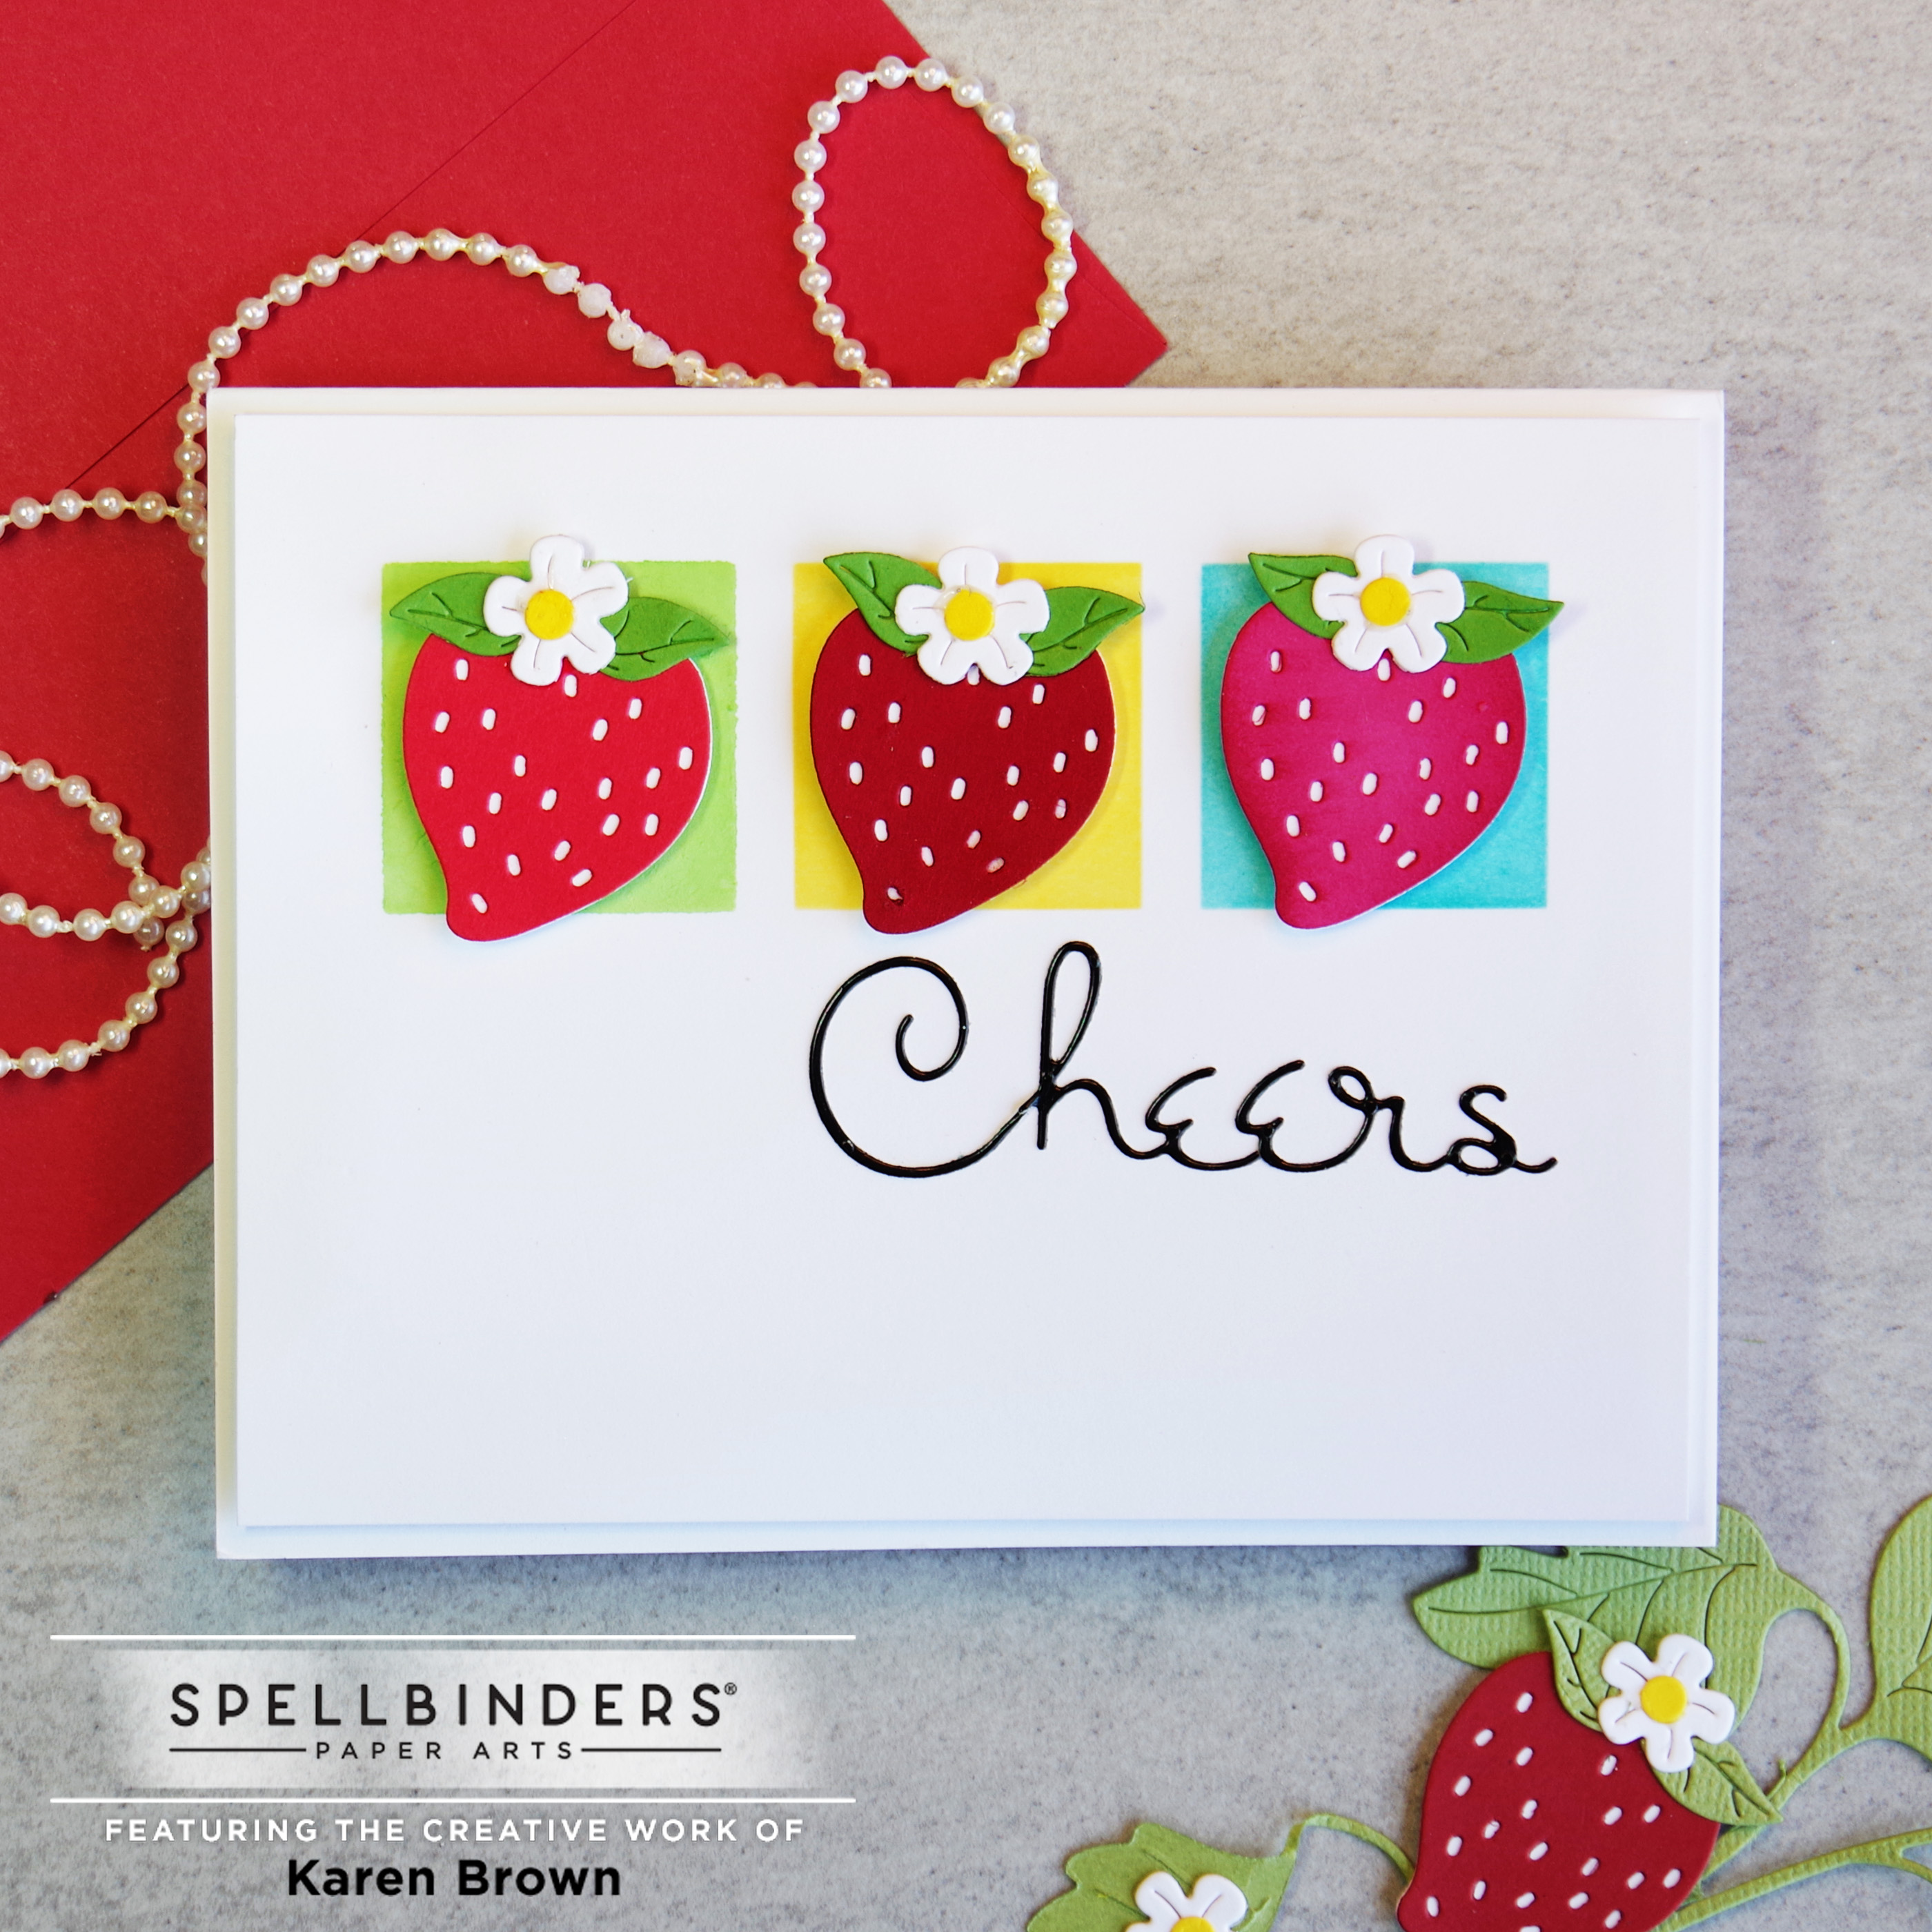 Spellbinders "Cheers" Outlined die cut Sentiment: August 2022 Small Die of the Month Strawberry Card.